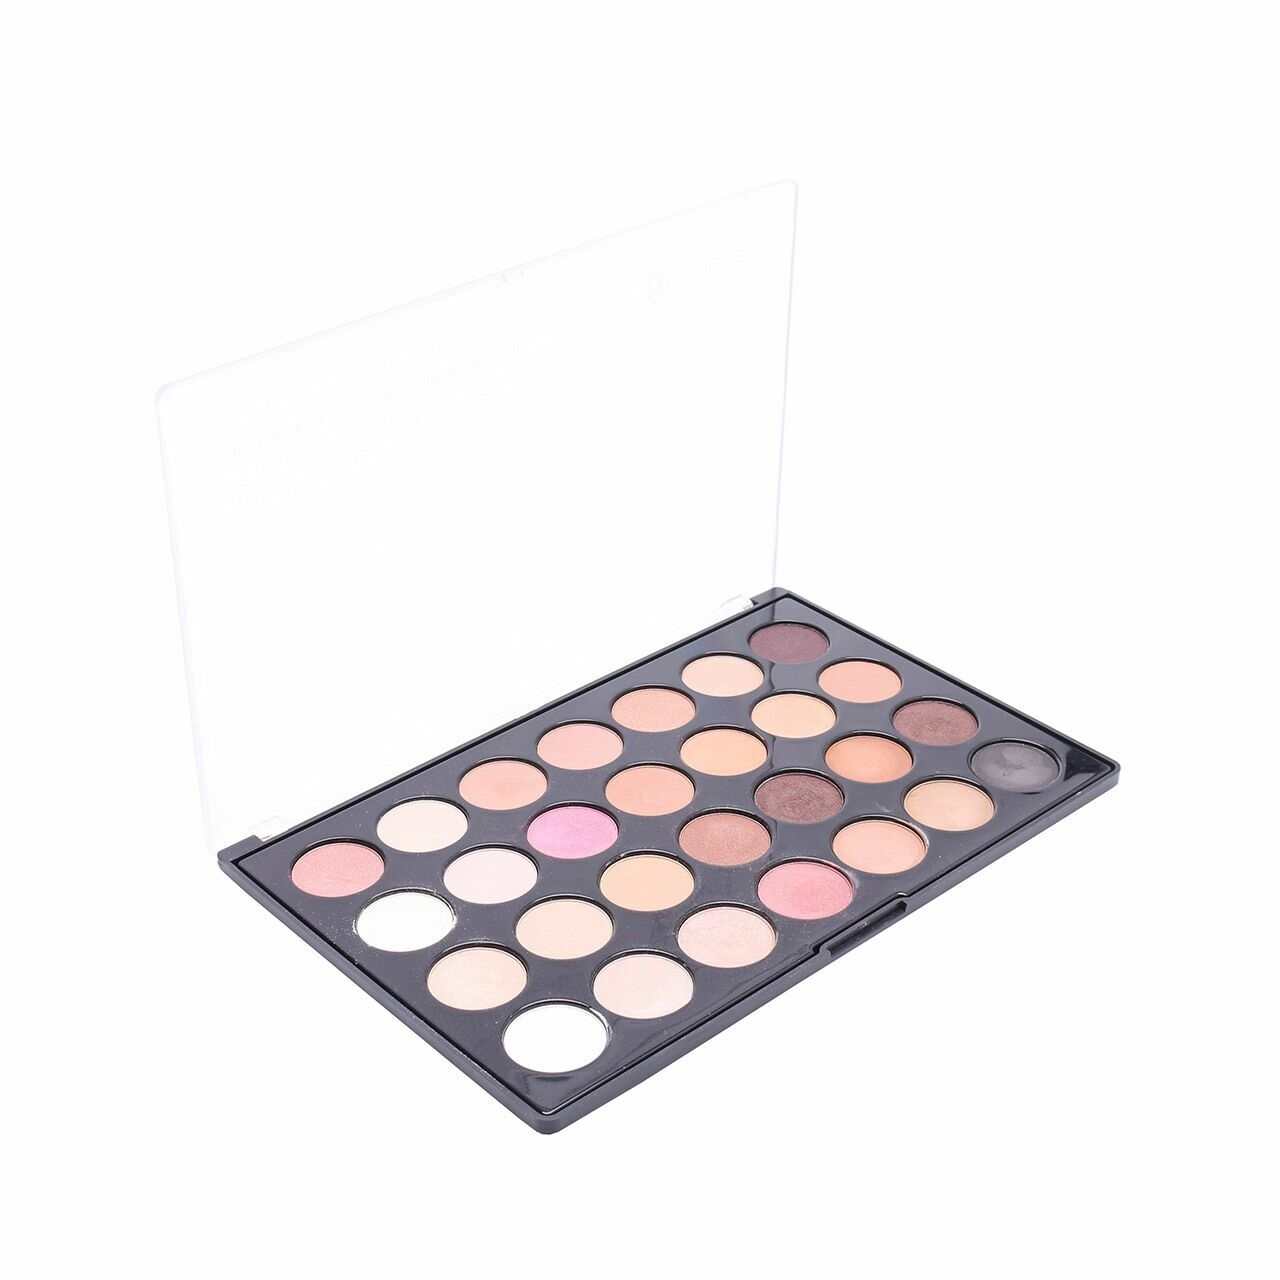 Bh Cosmetics Neutral Eyes 28 Color Eyeshadow Palette Sets and Palette